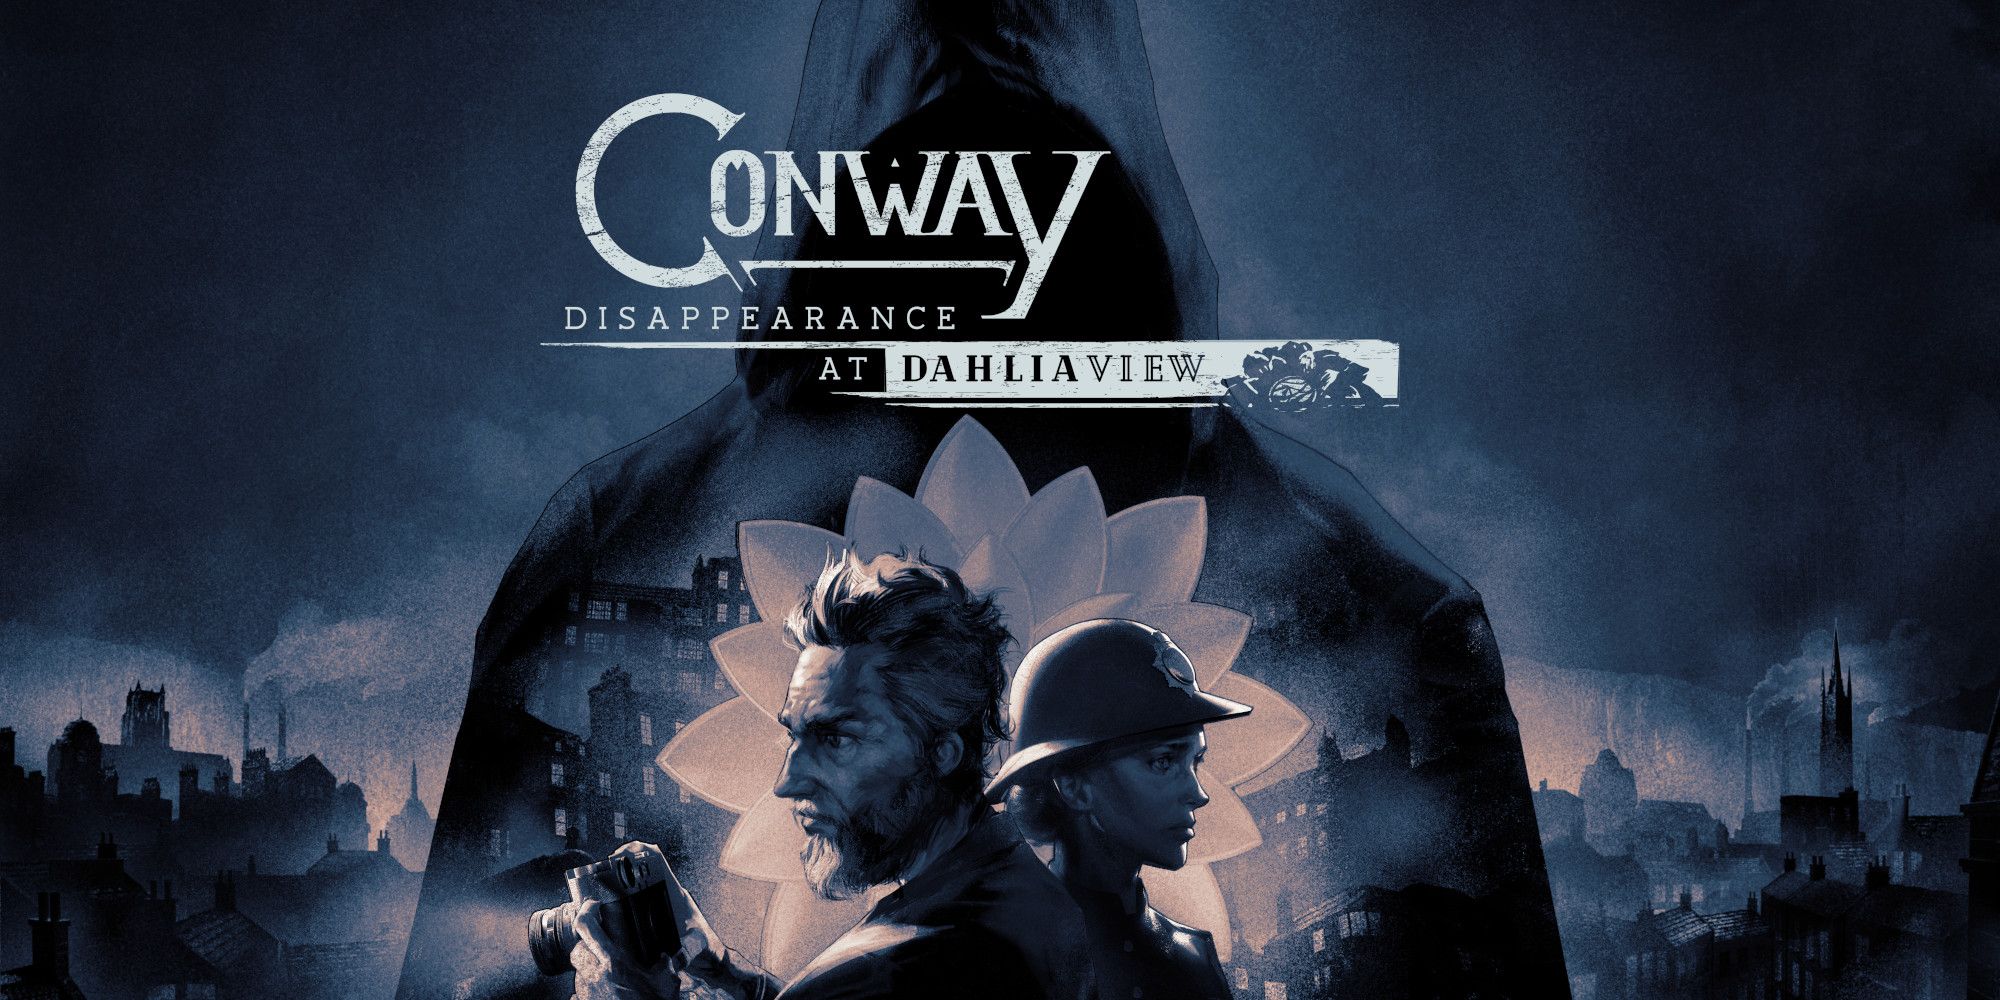 Conway Disappearance at Dahlia View Art